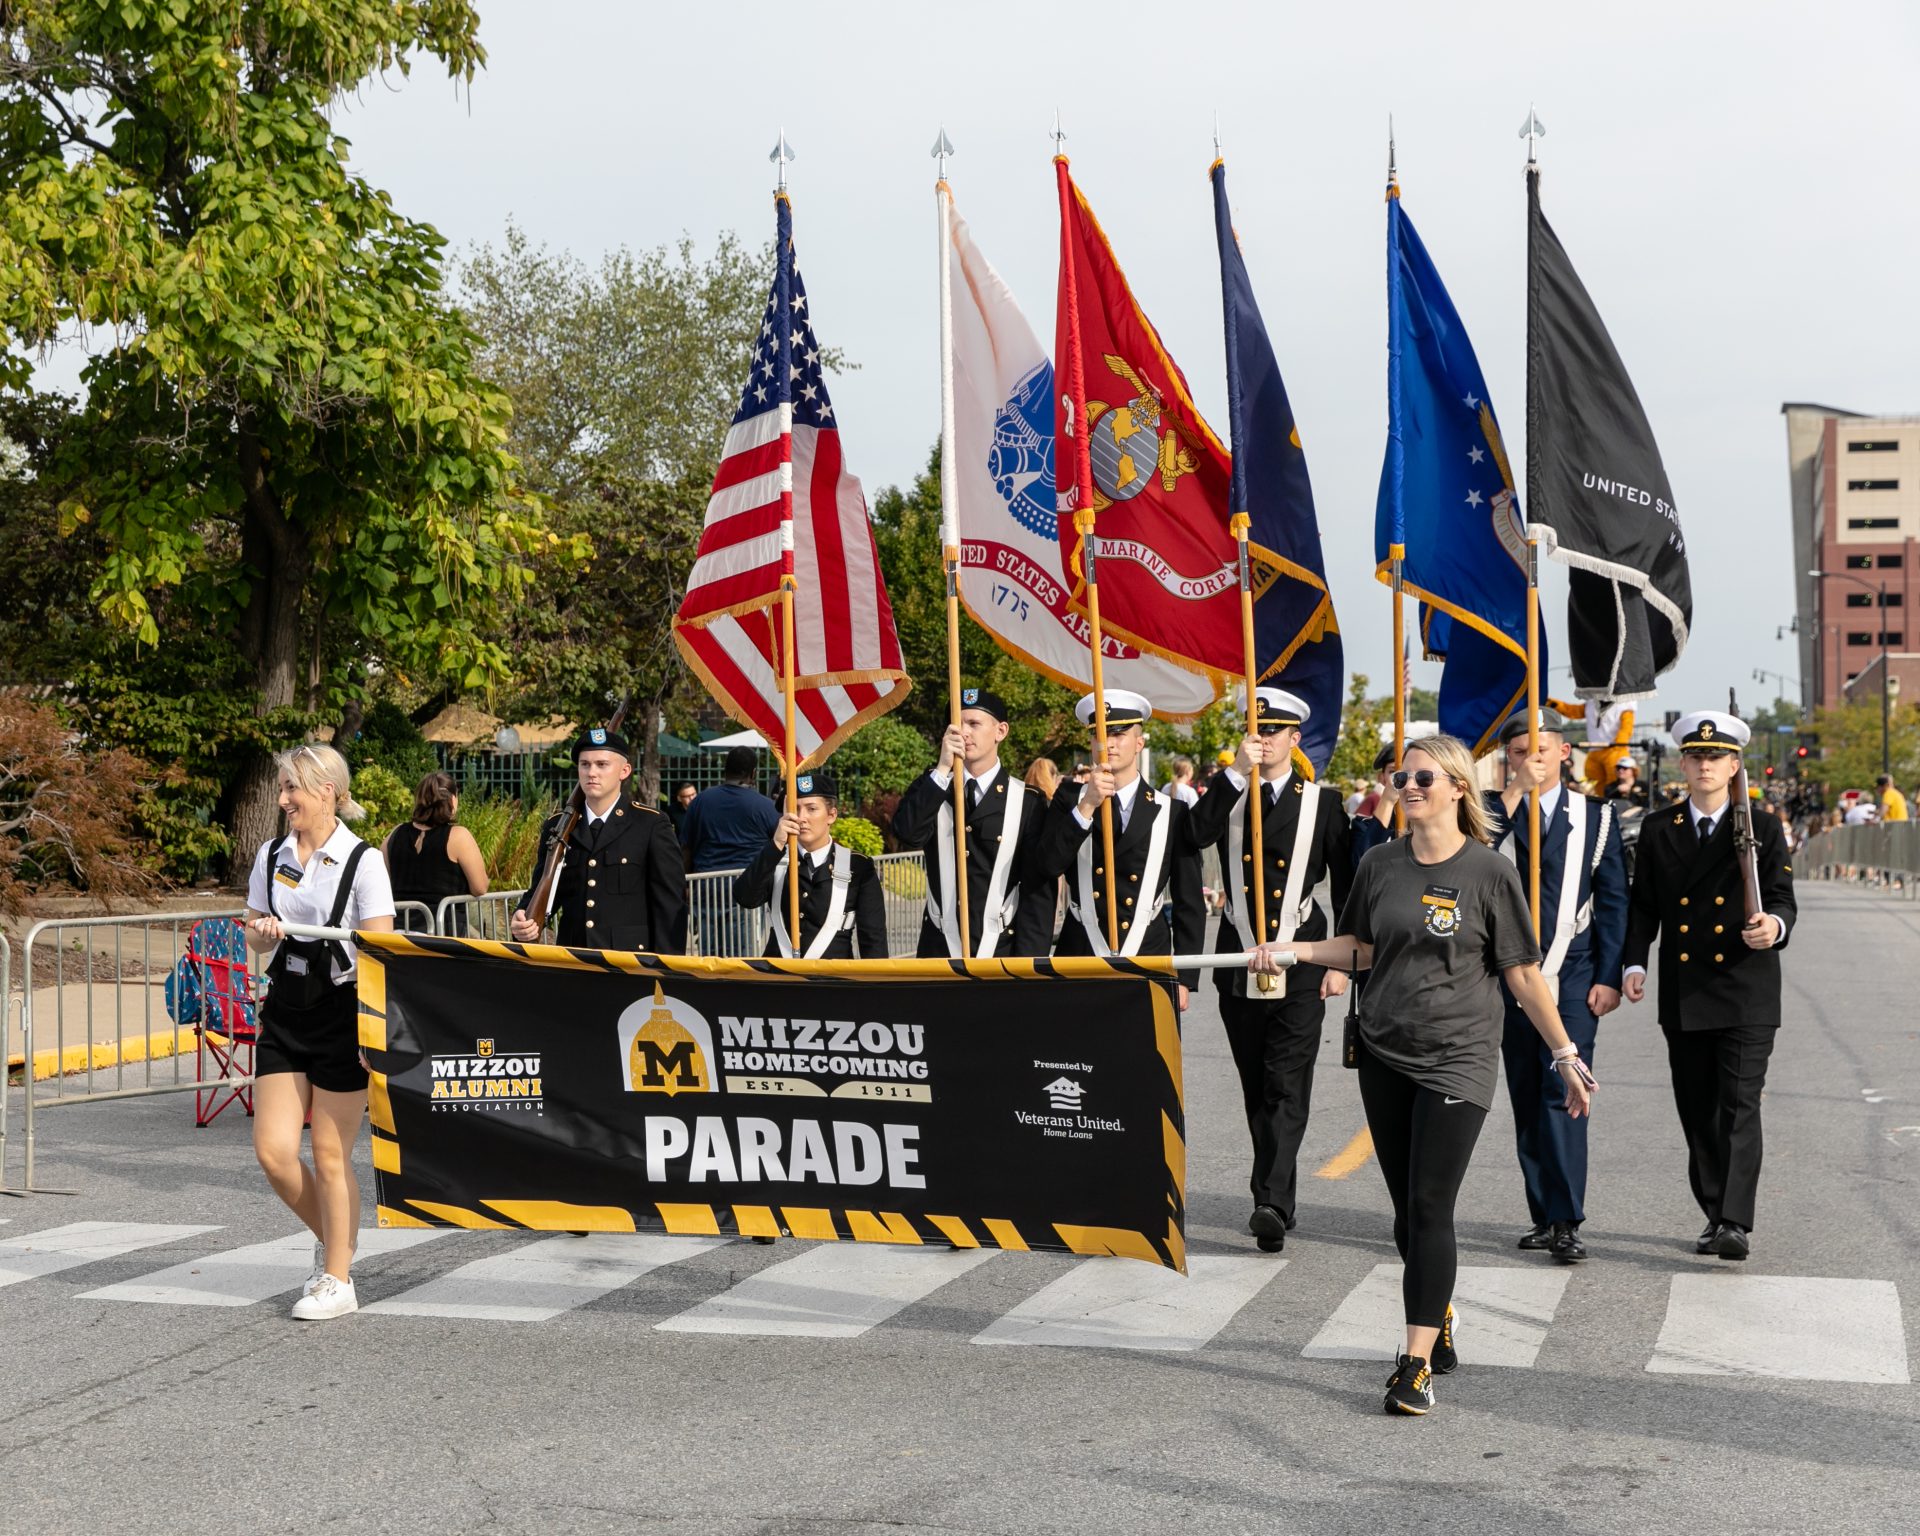 Mizzou parade usually attracts 40,000 spectators 93.9 The